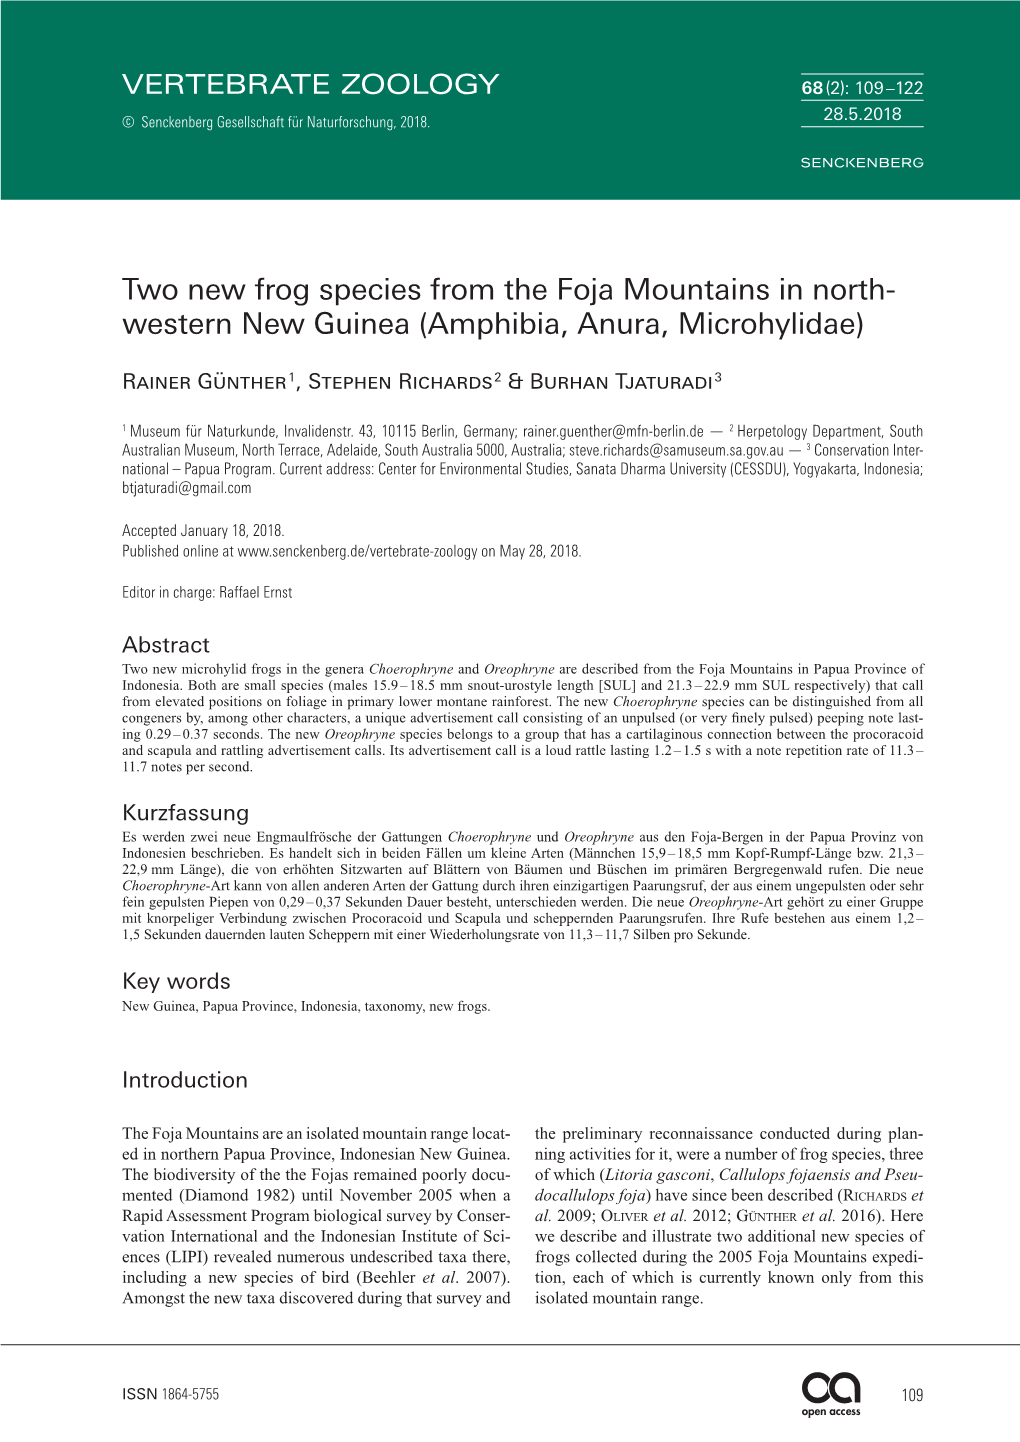 Two New Frog Species from the Foja Mountains in Northwestern New Guinea (Amphibia, Anura, Microhylidae)